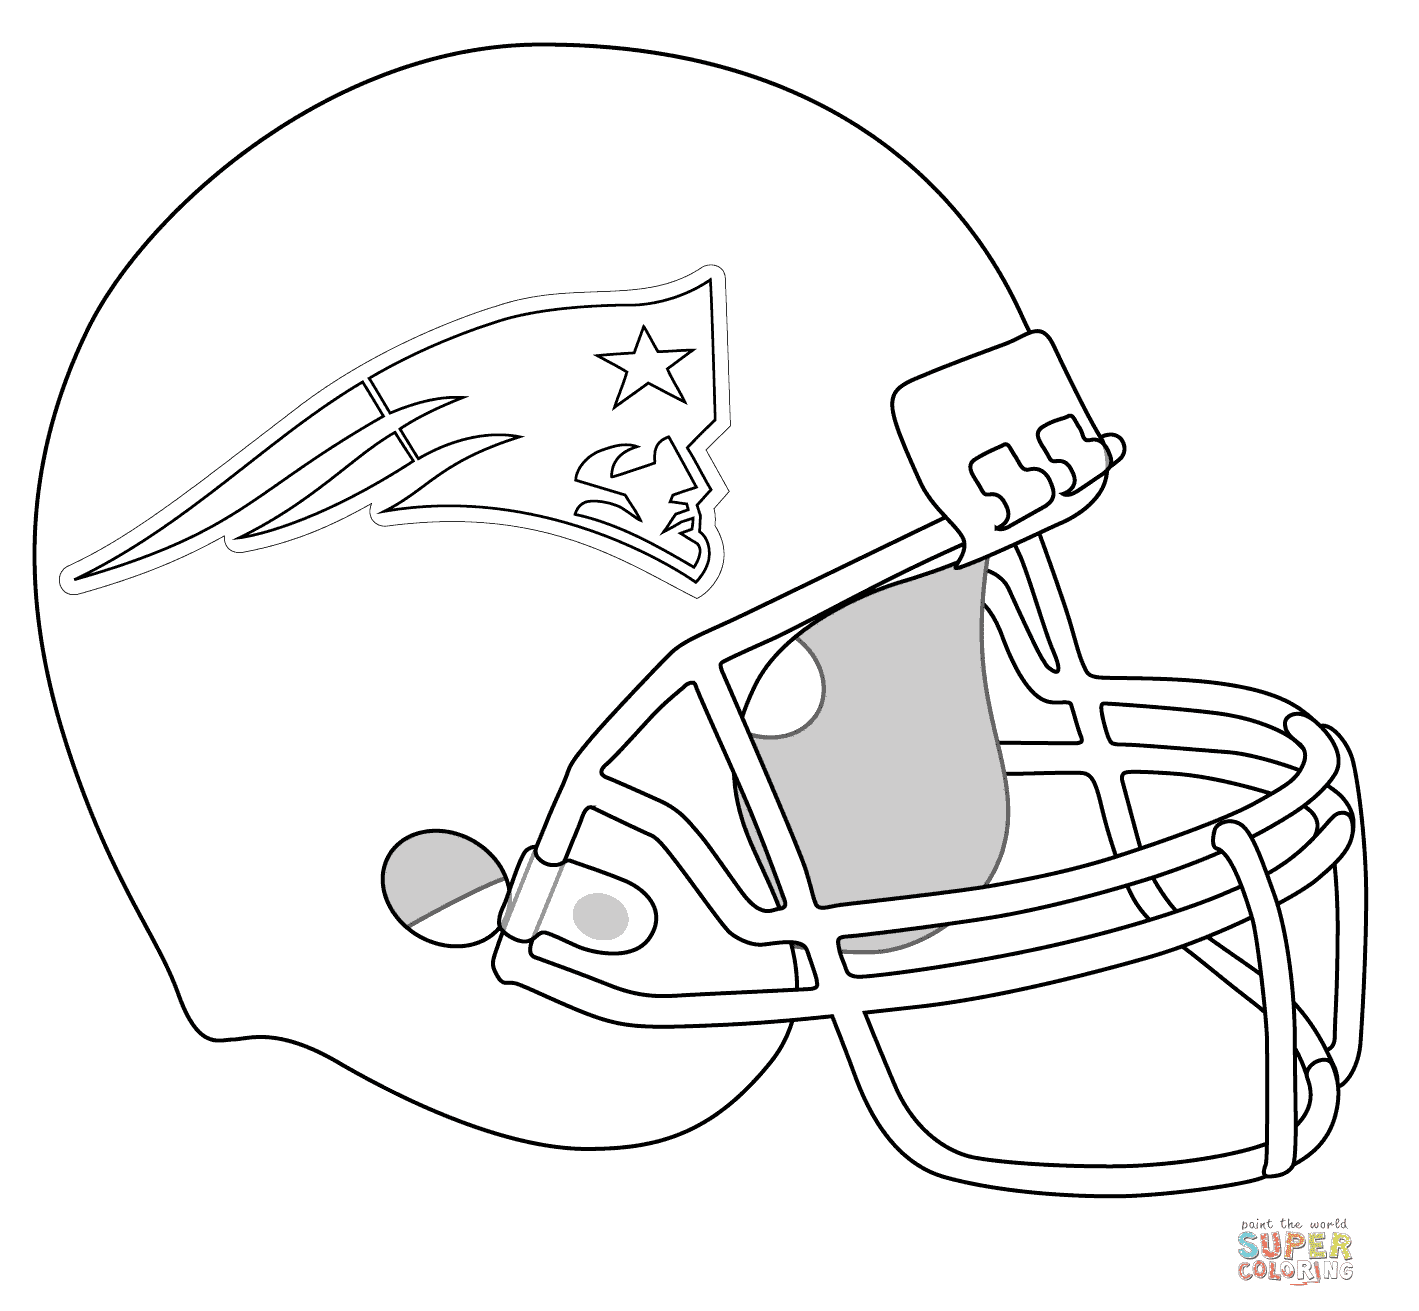 New England Patriots Helmet Coloring Pages